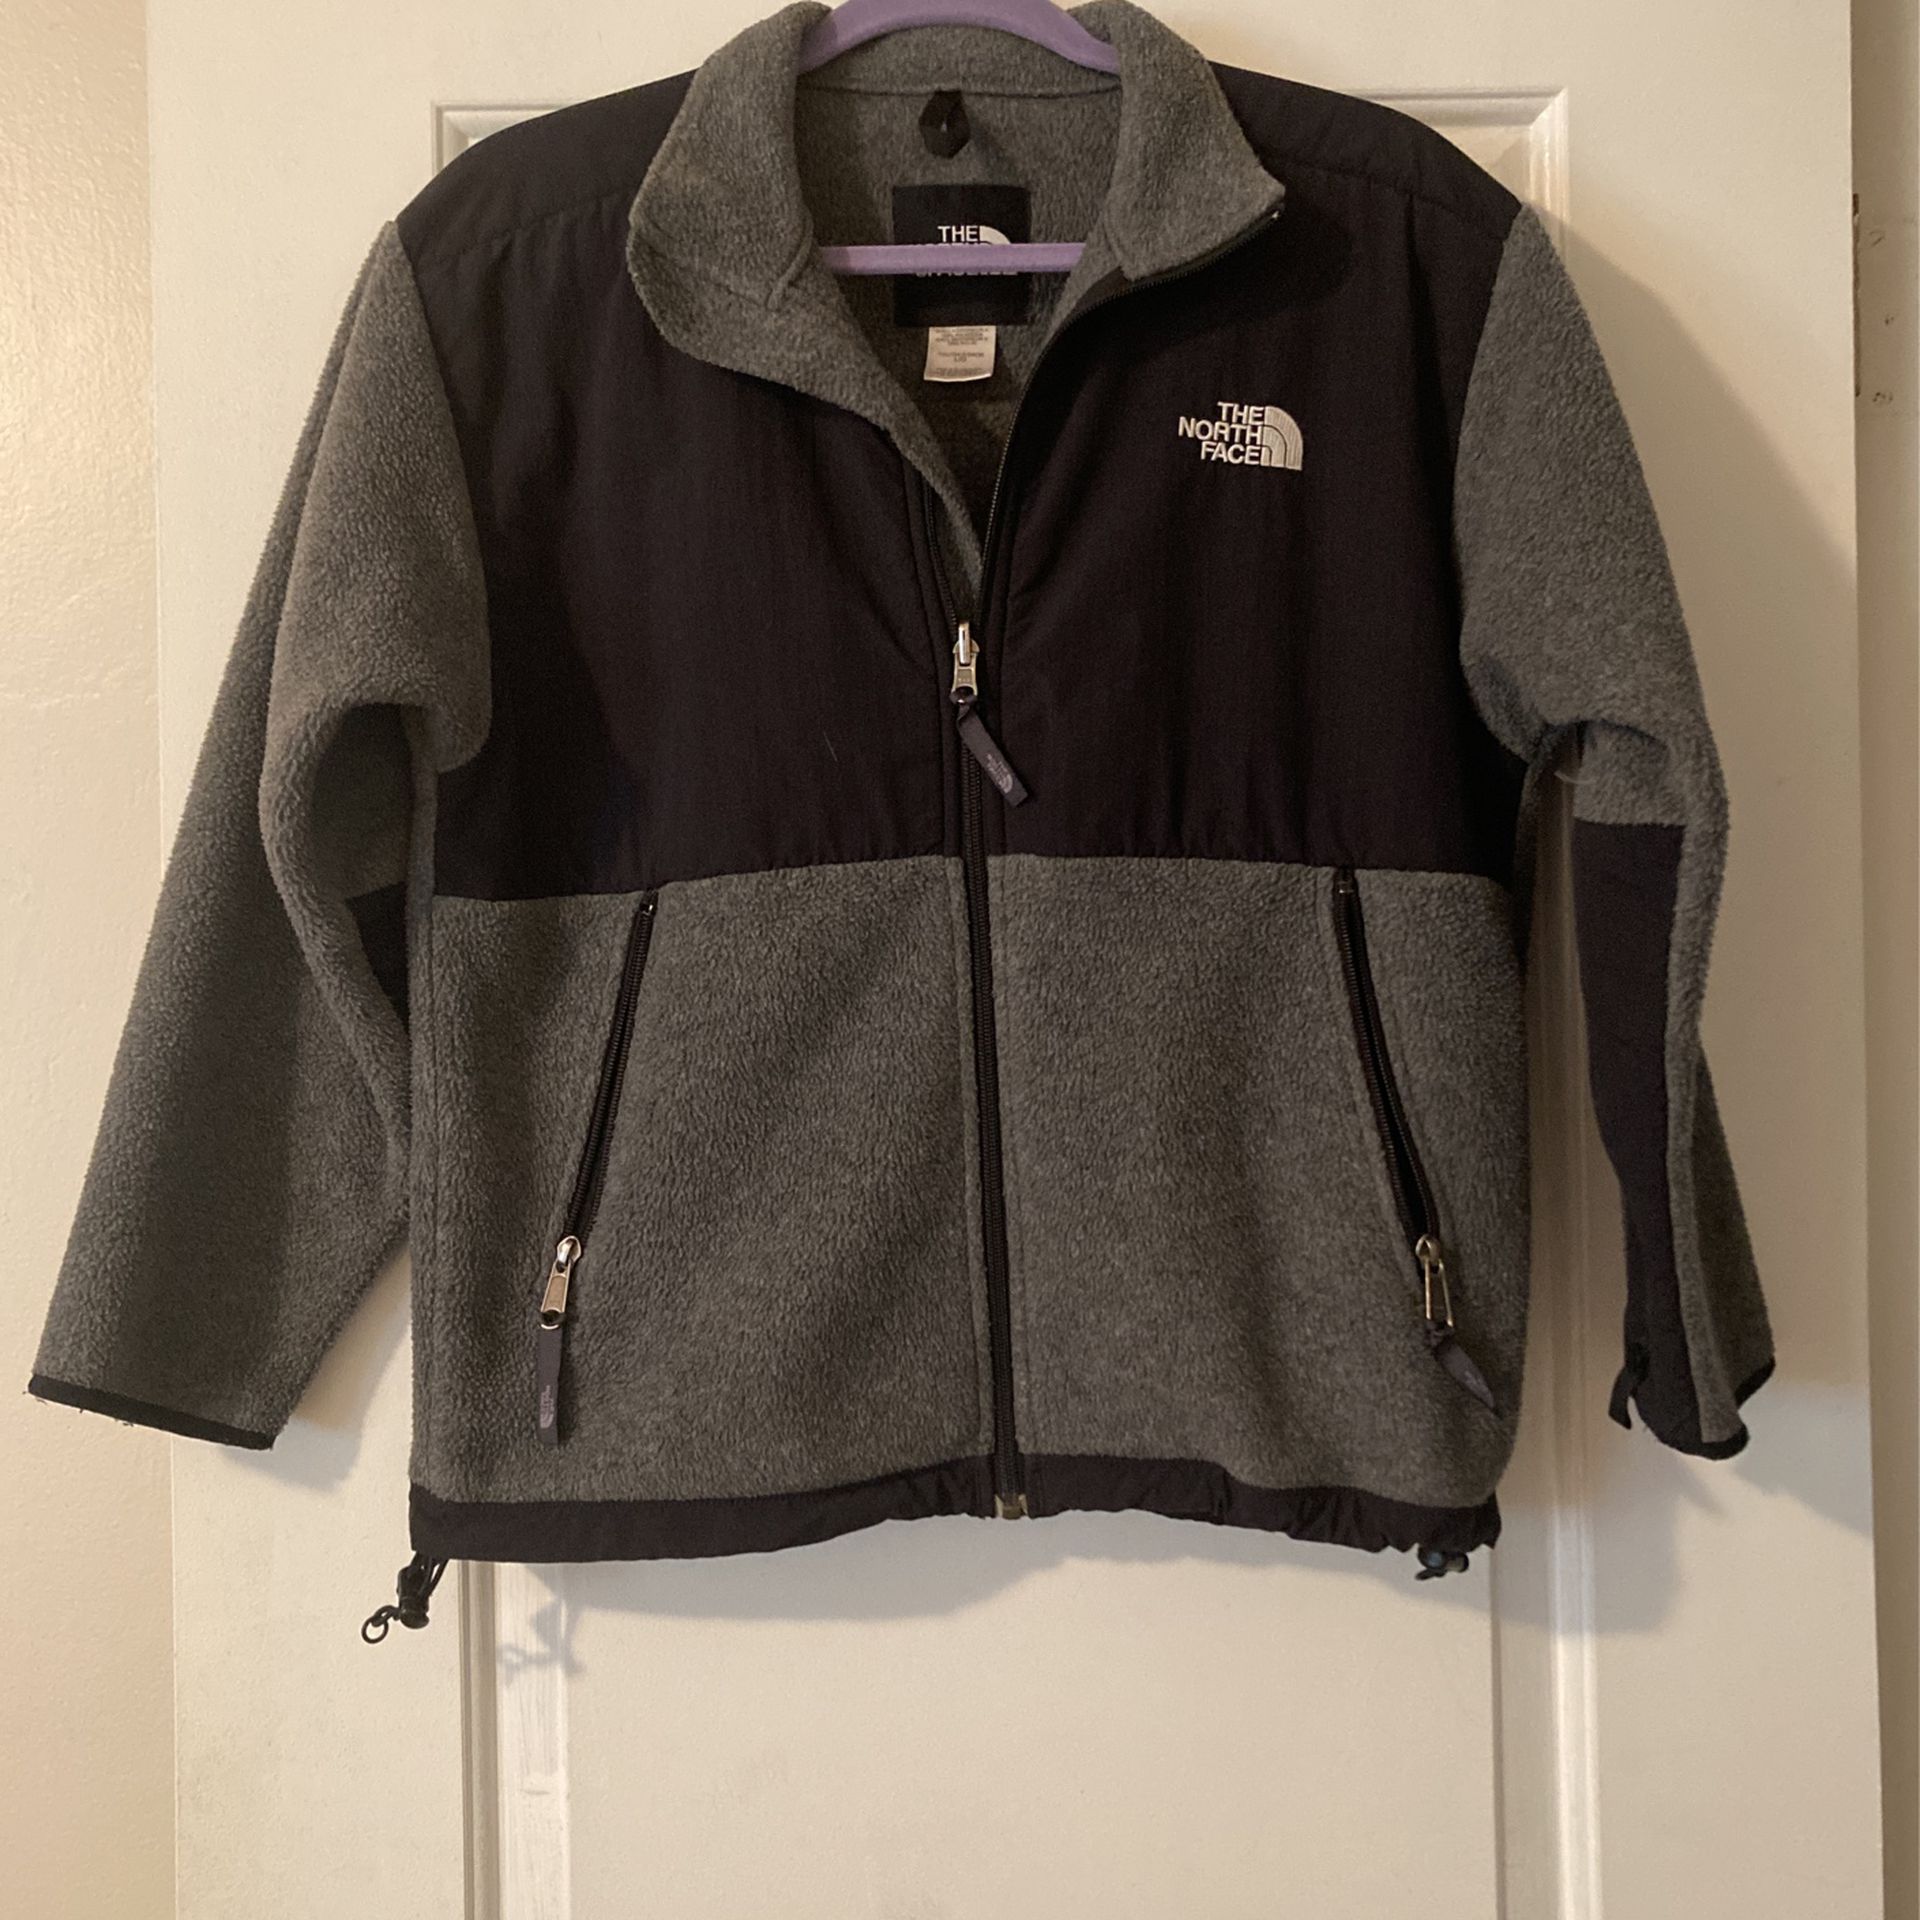 CLASSIC *The North Face* fleece jacket, Youth Large